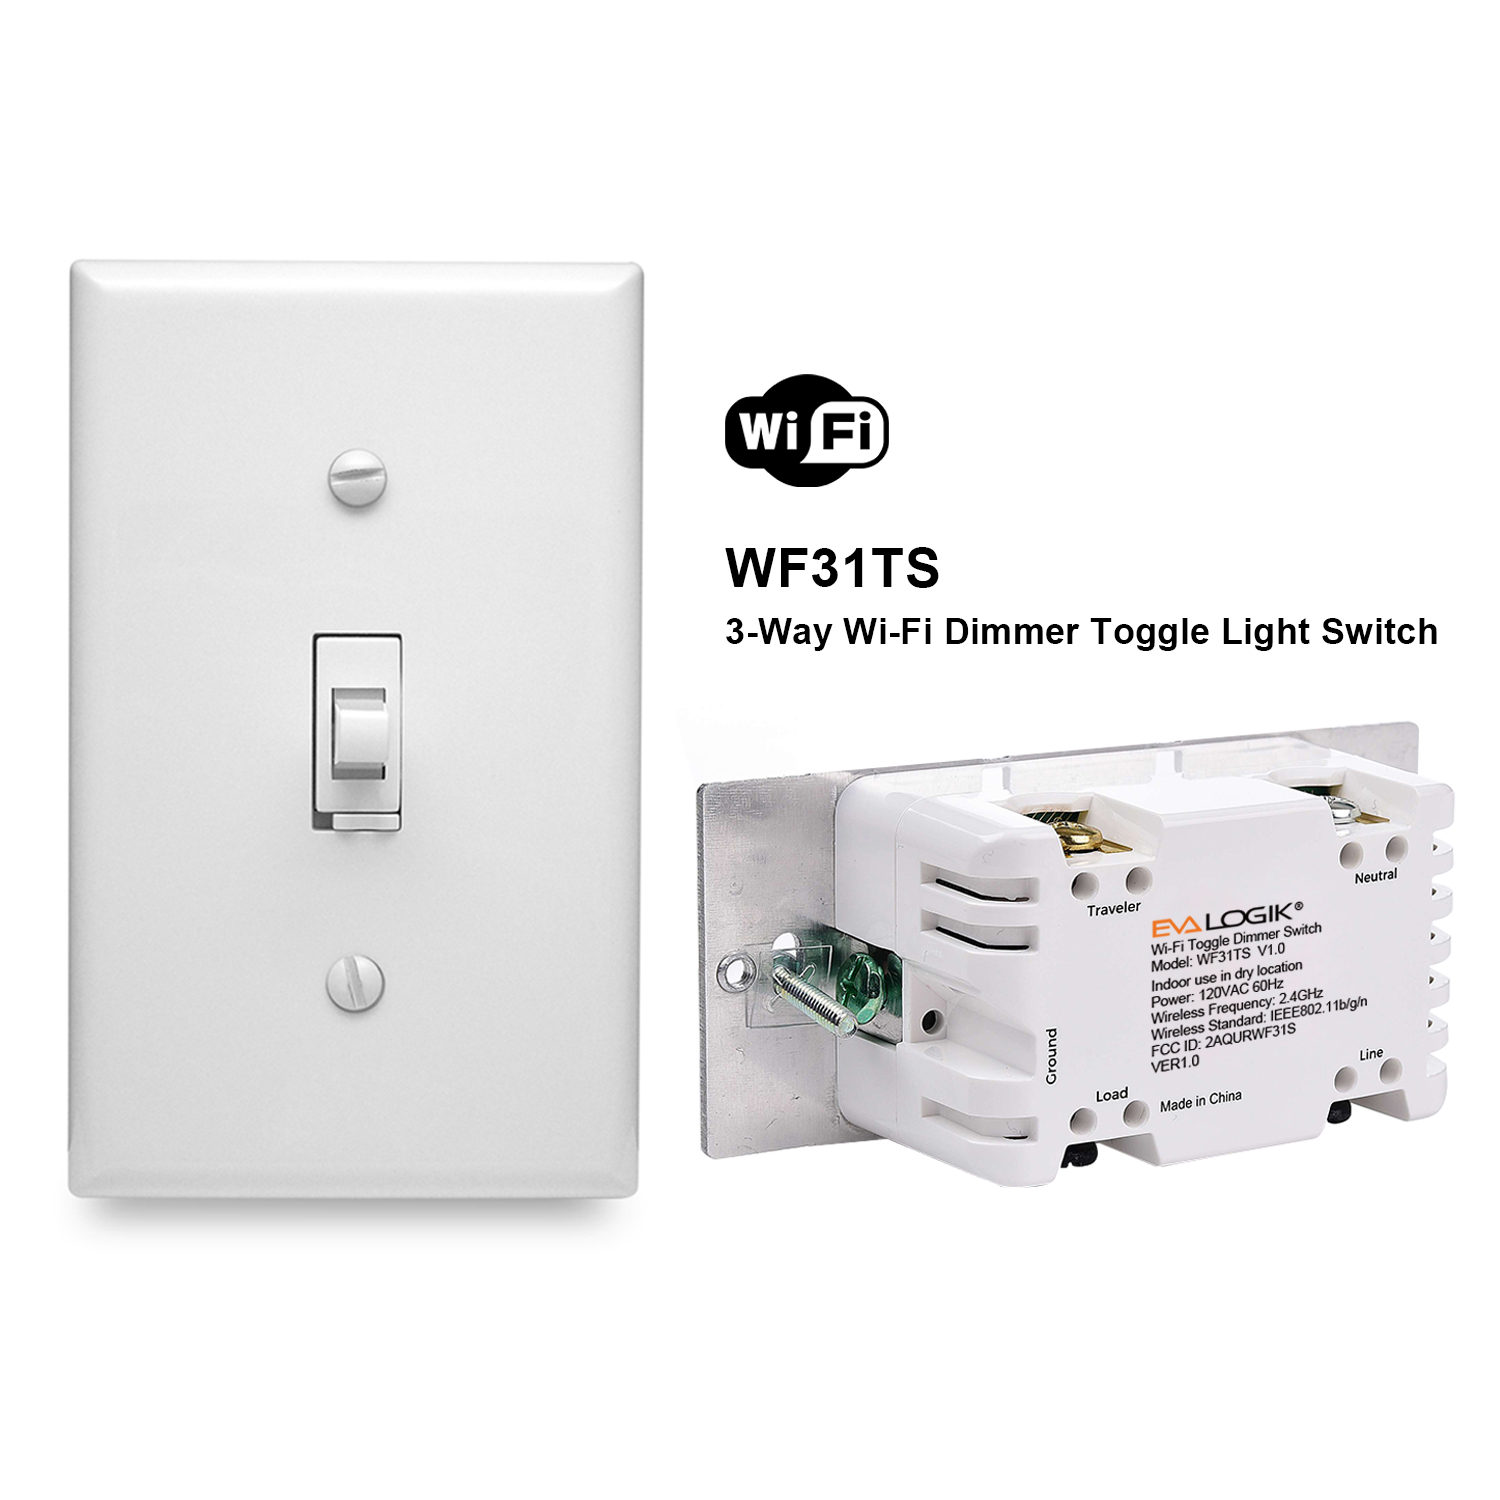 Customized In-wall WiFi Timer Countdown Smart Light Switches Manufacturers,  Suppliers, Factory - Made in China - NIE-TECH